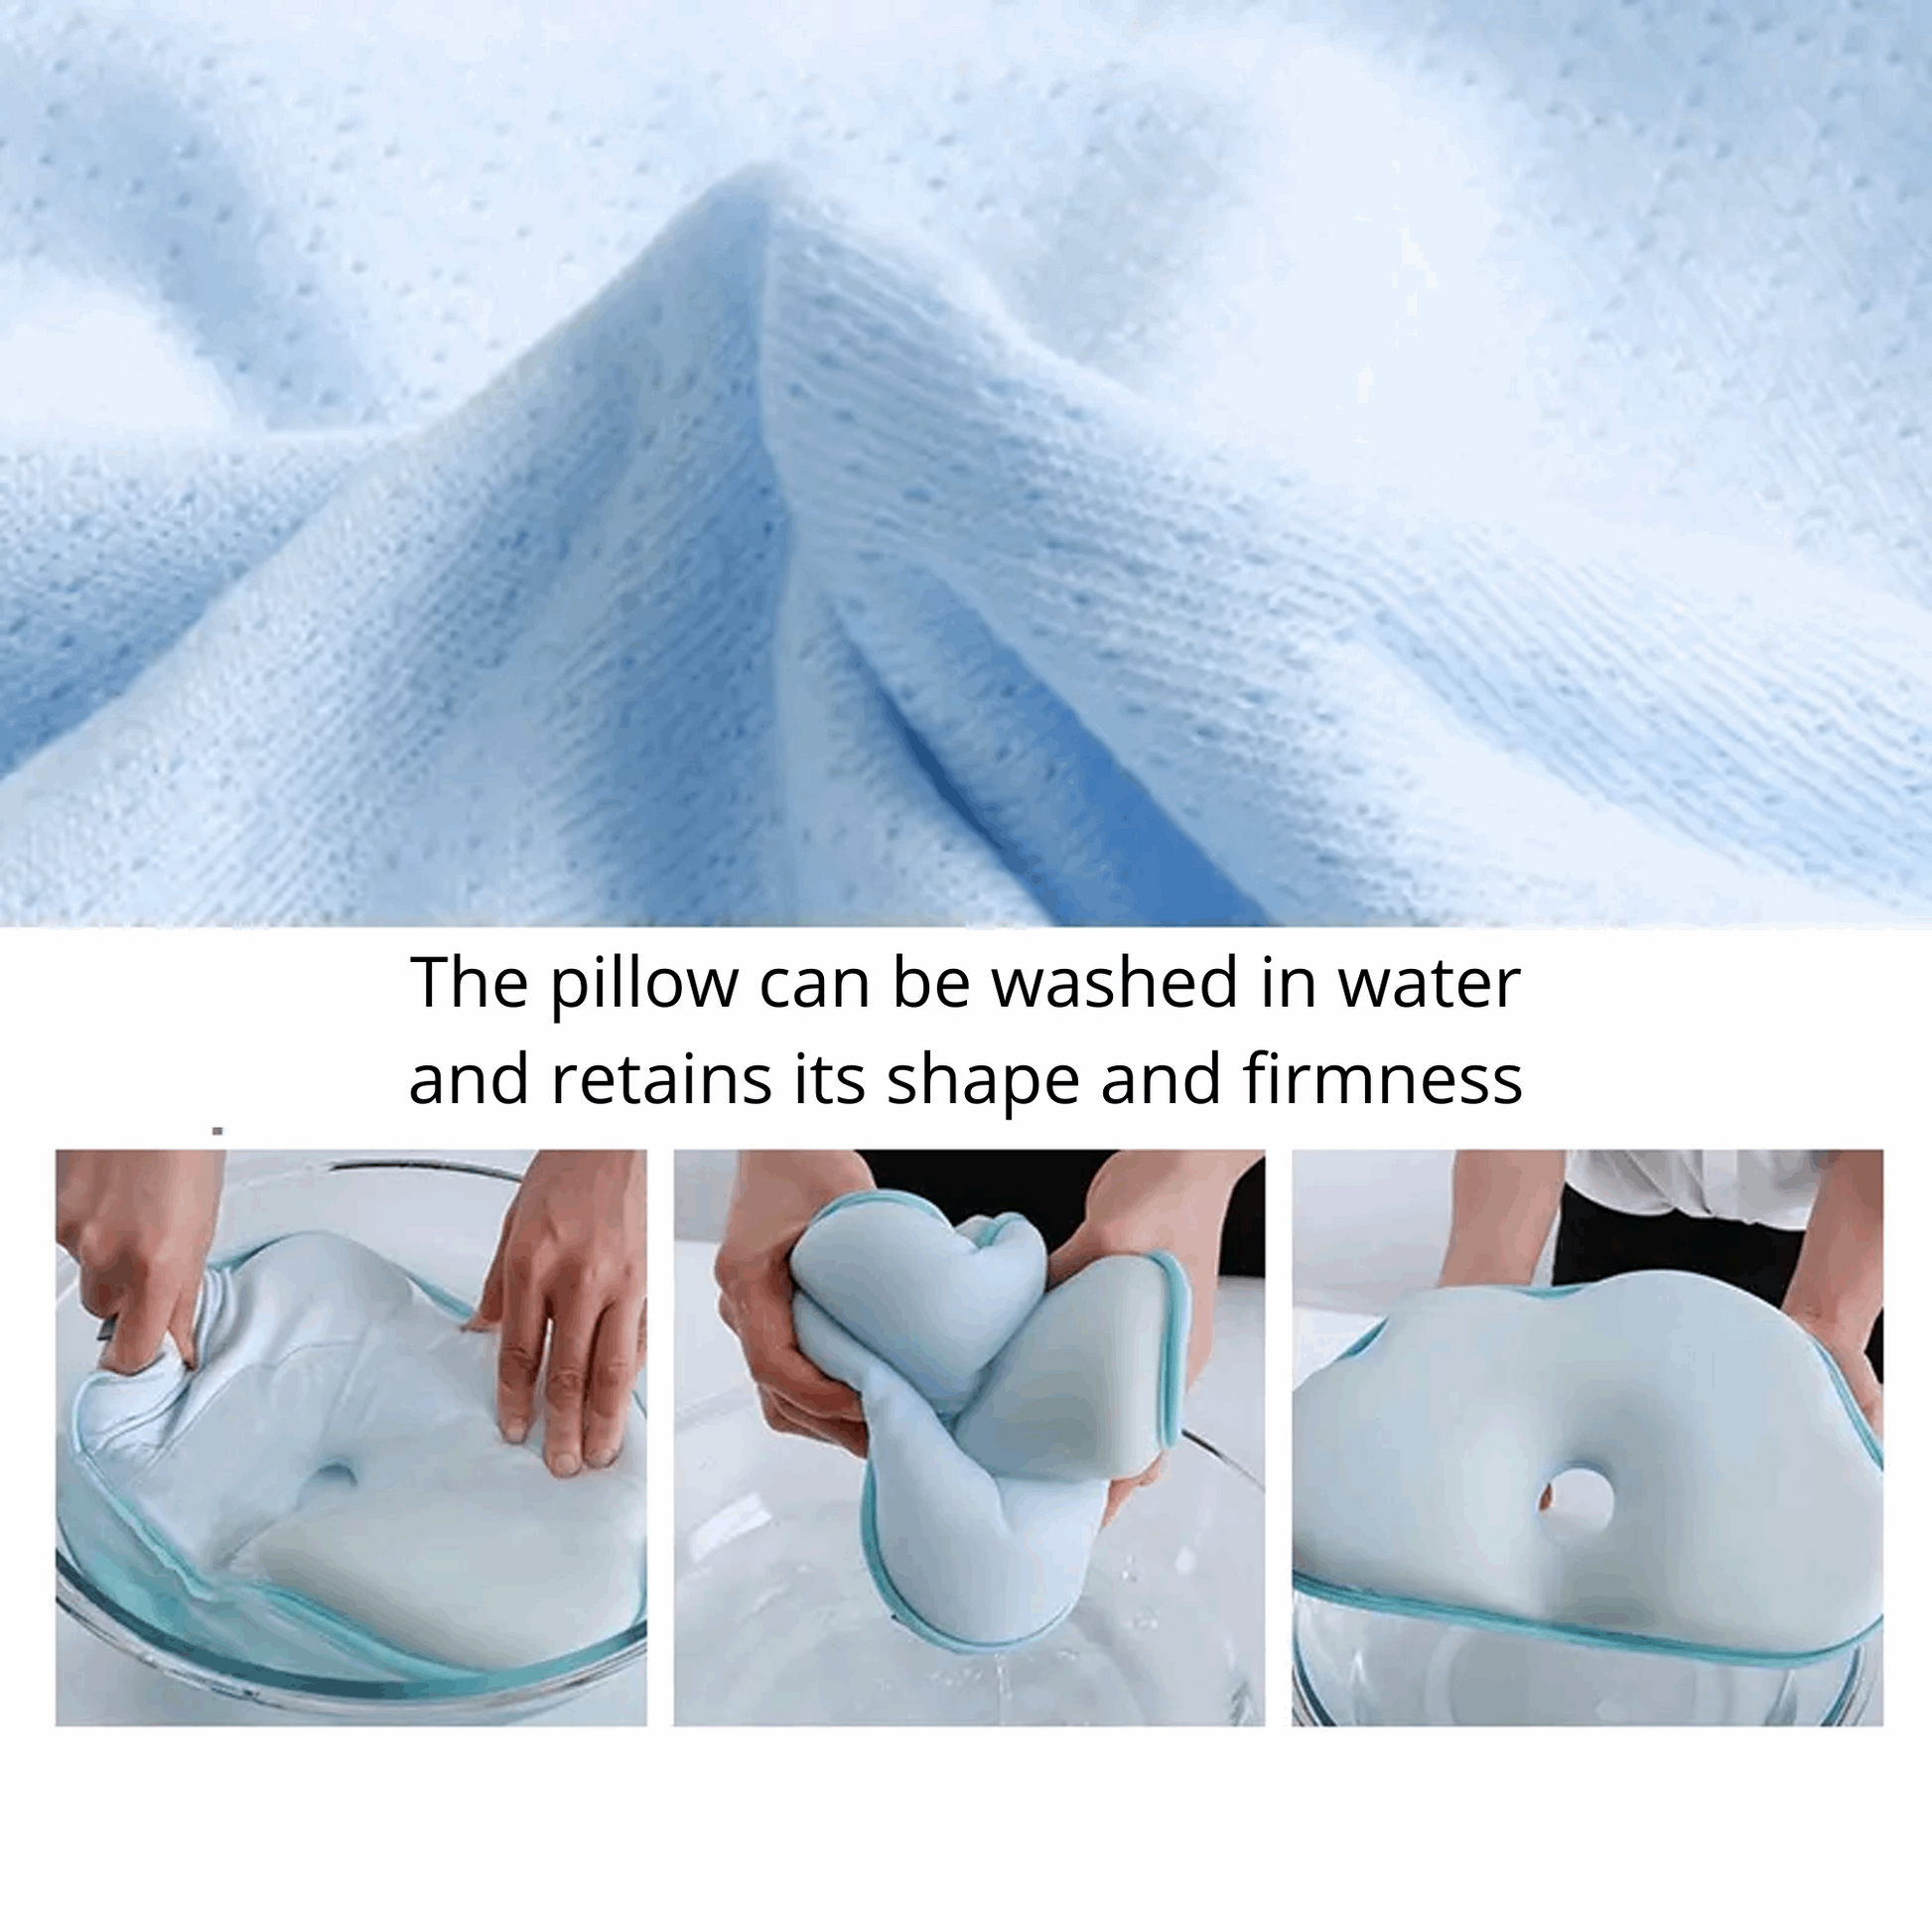 Baby Pillow - For Comfortable Sleep and Healthy Development